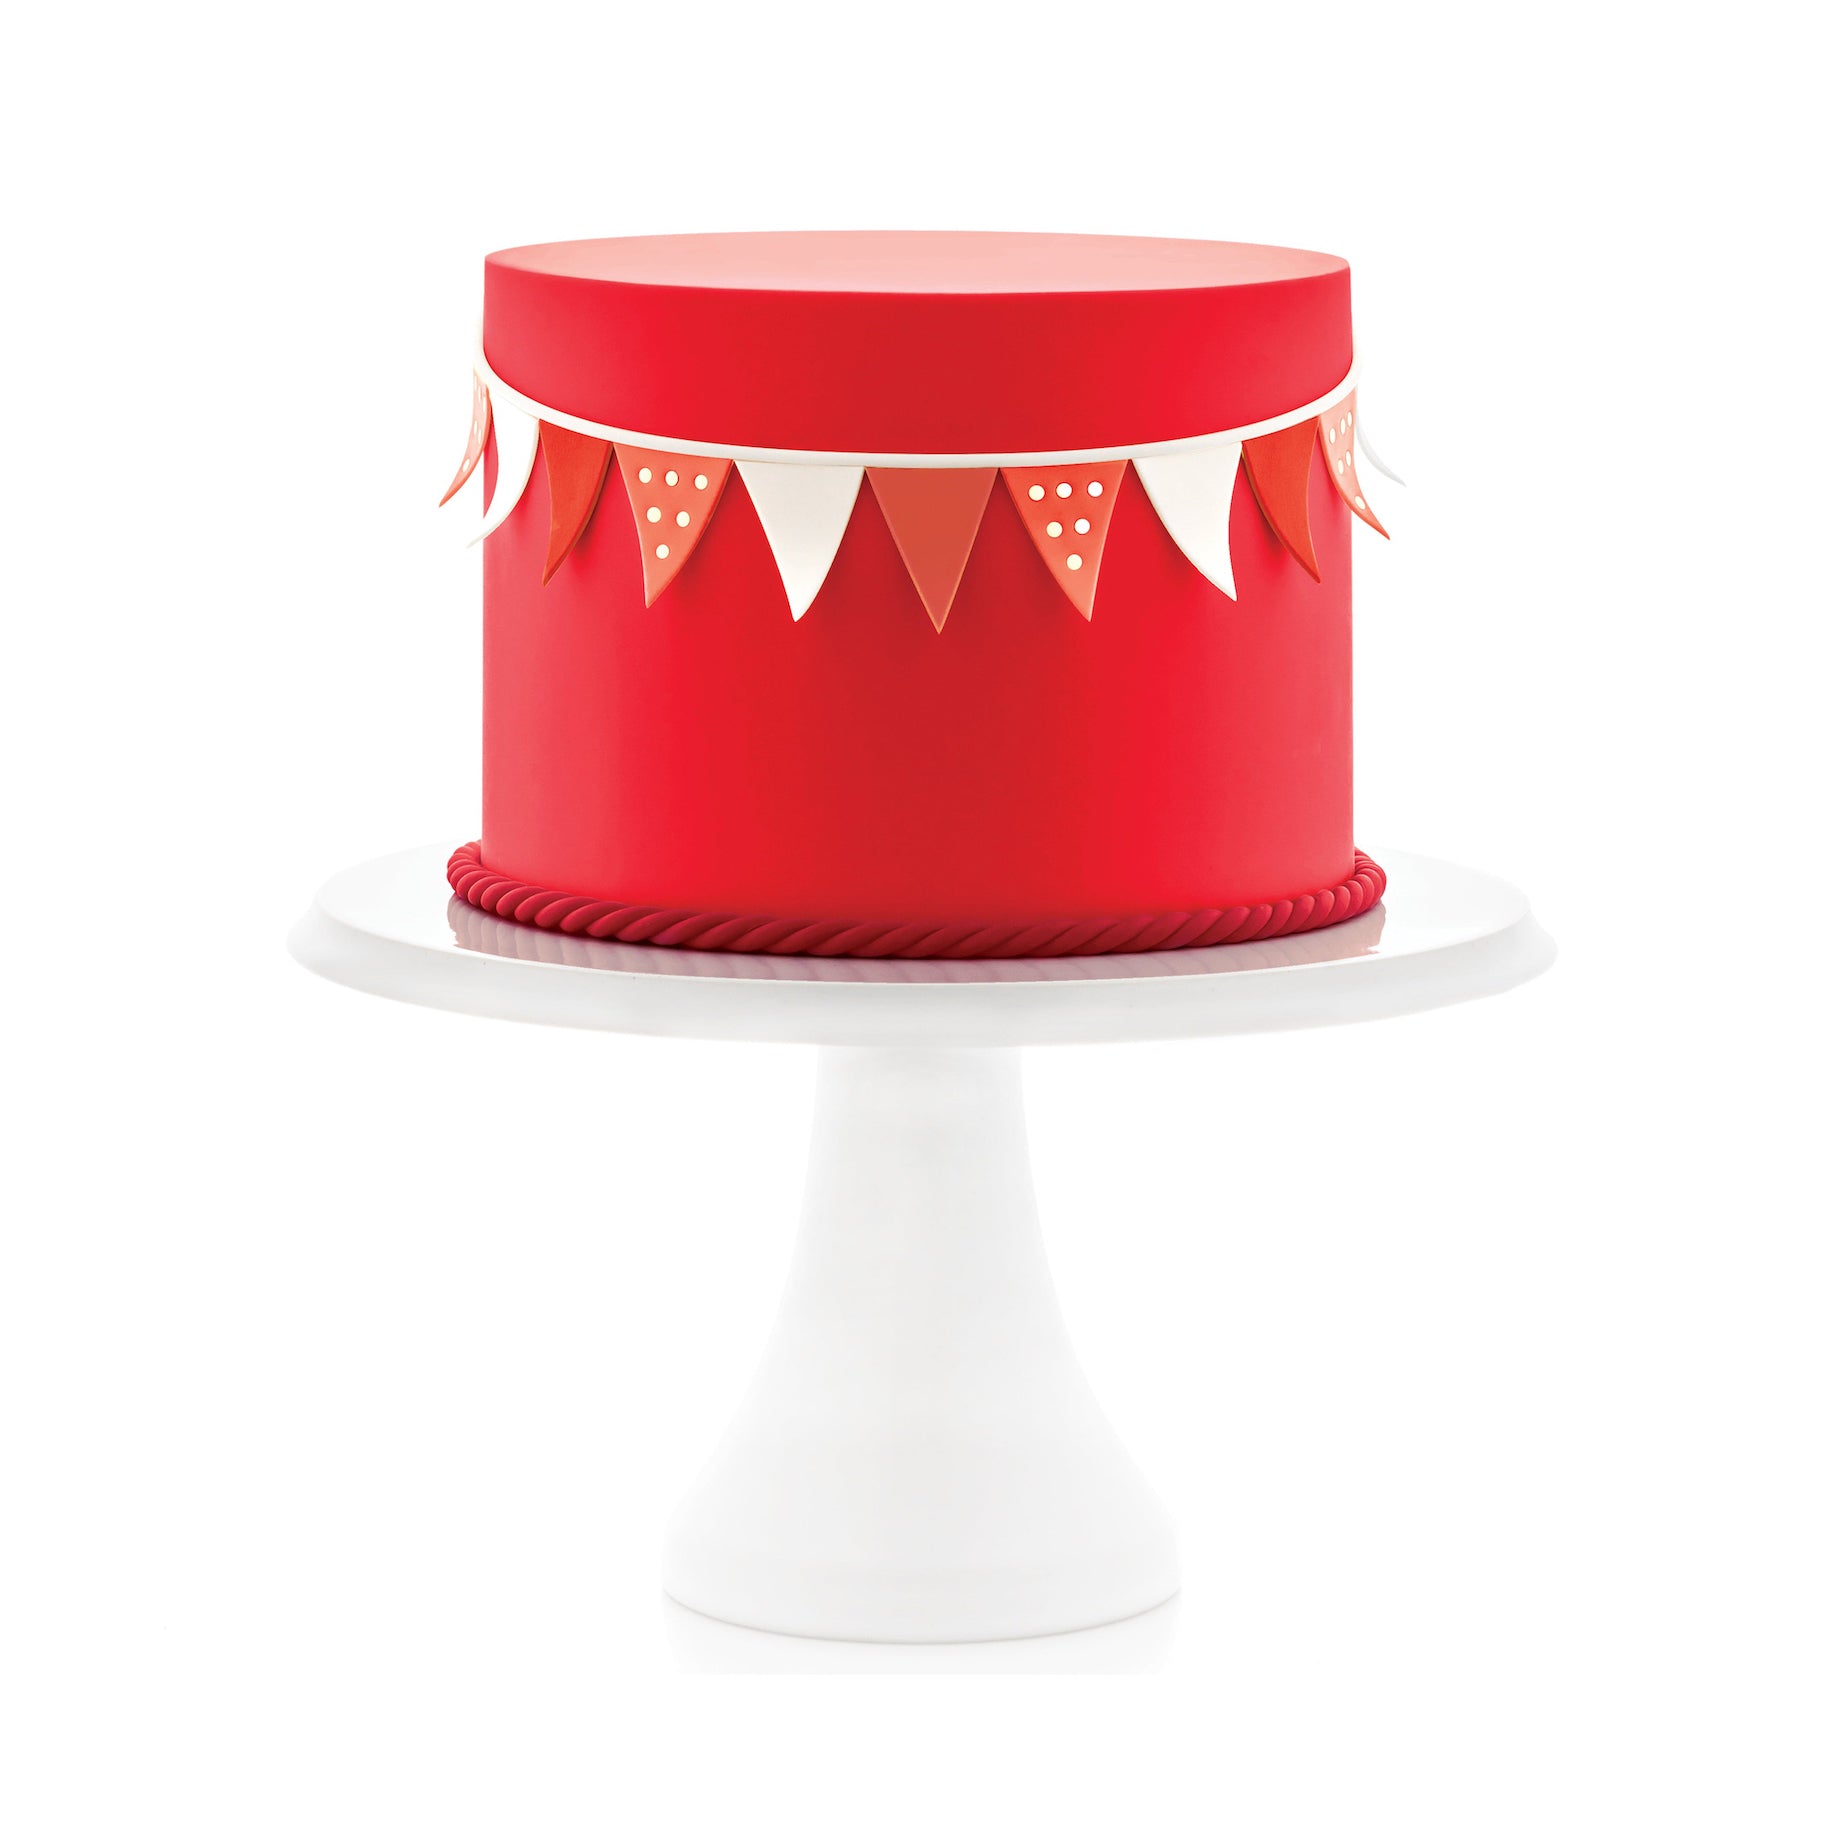 SATIN ICE Rolled Fondant Red